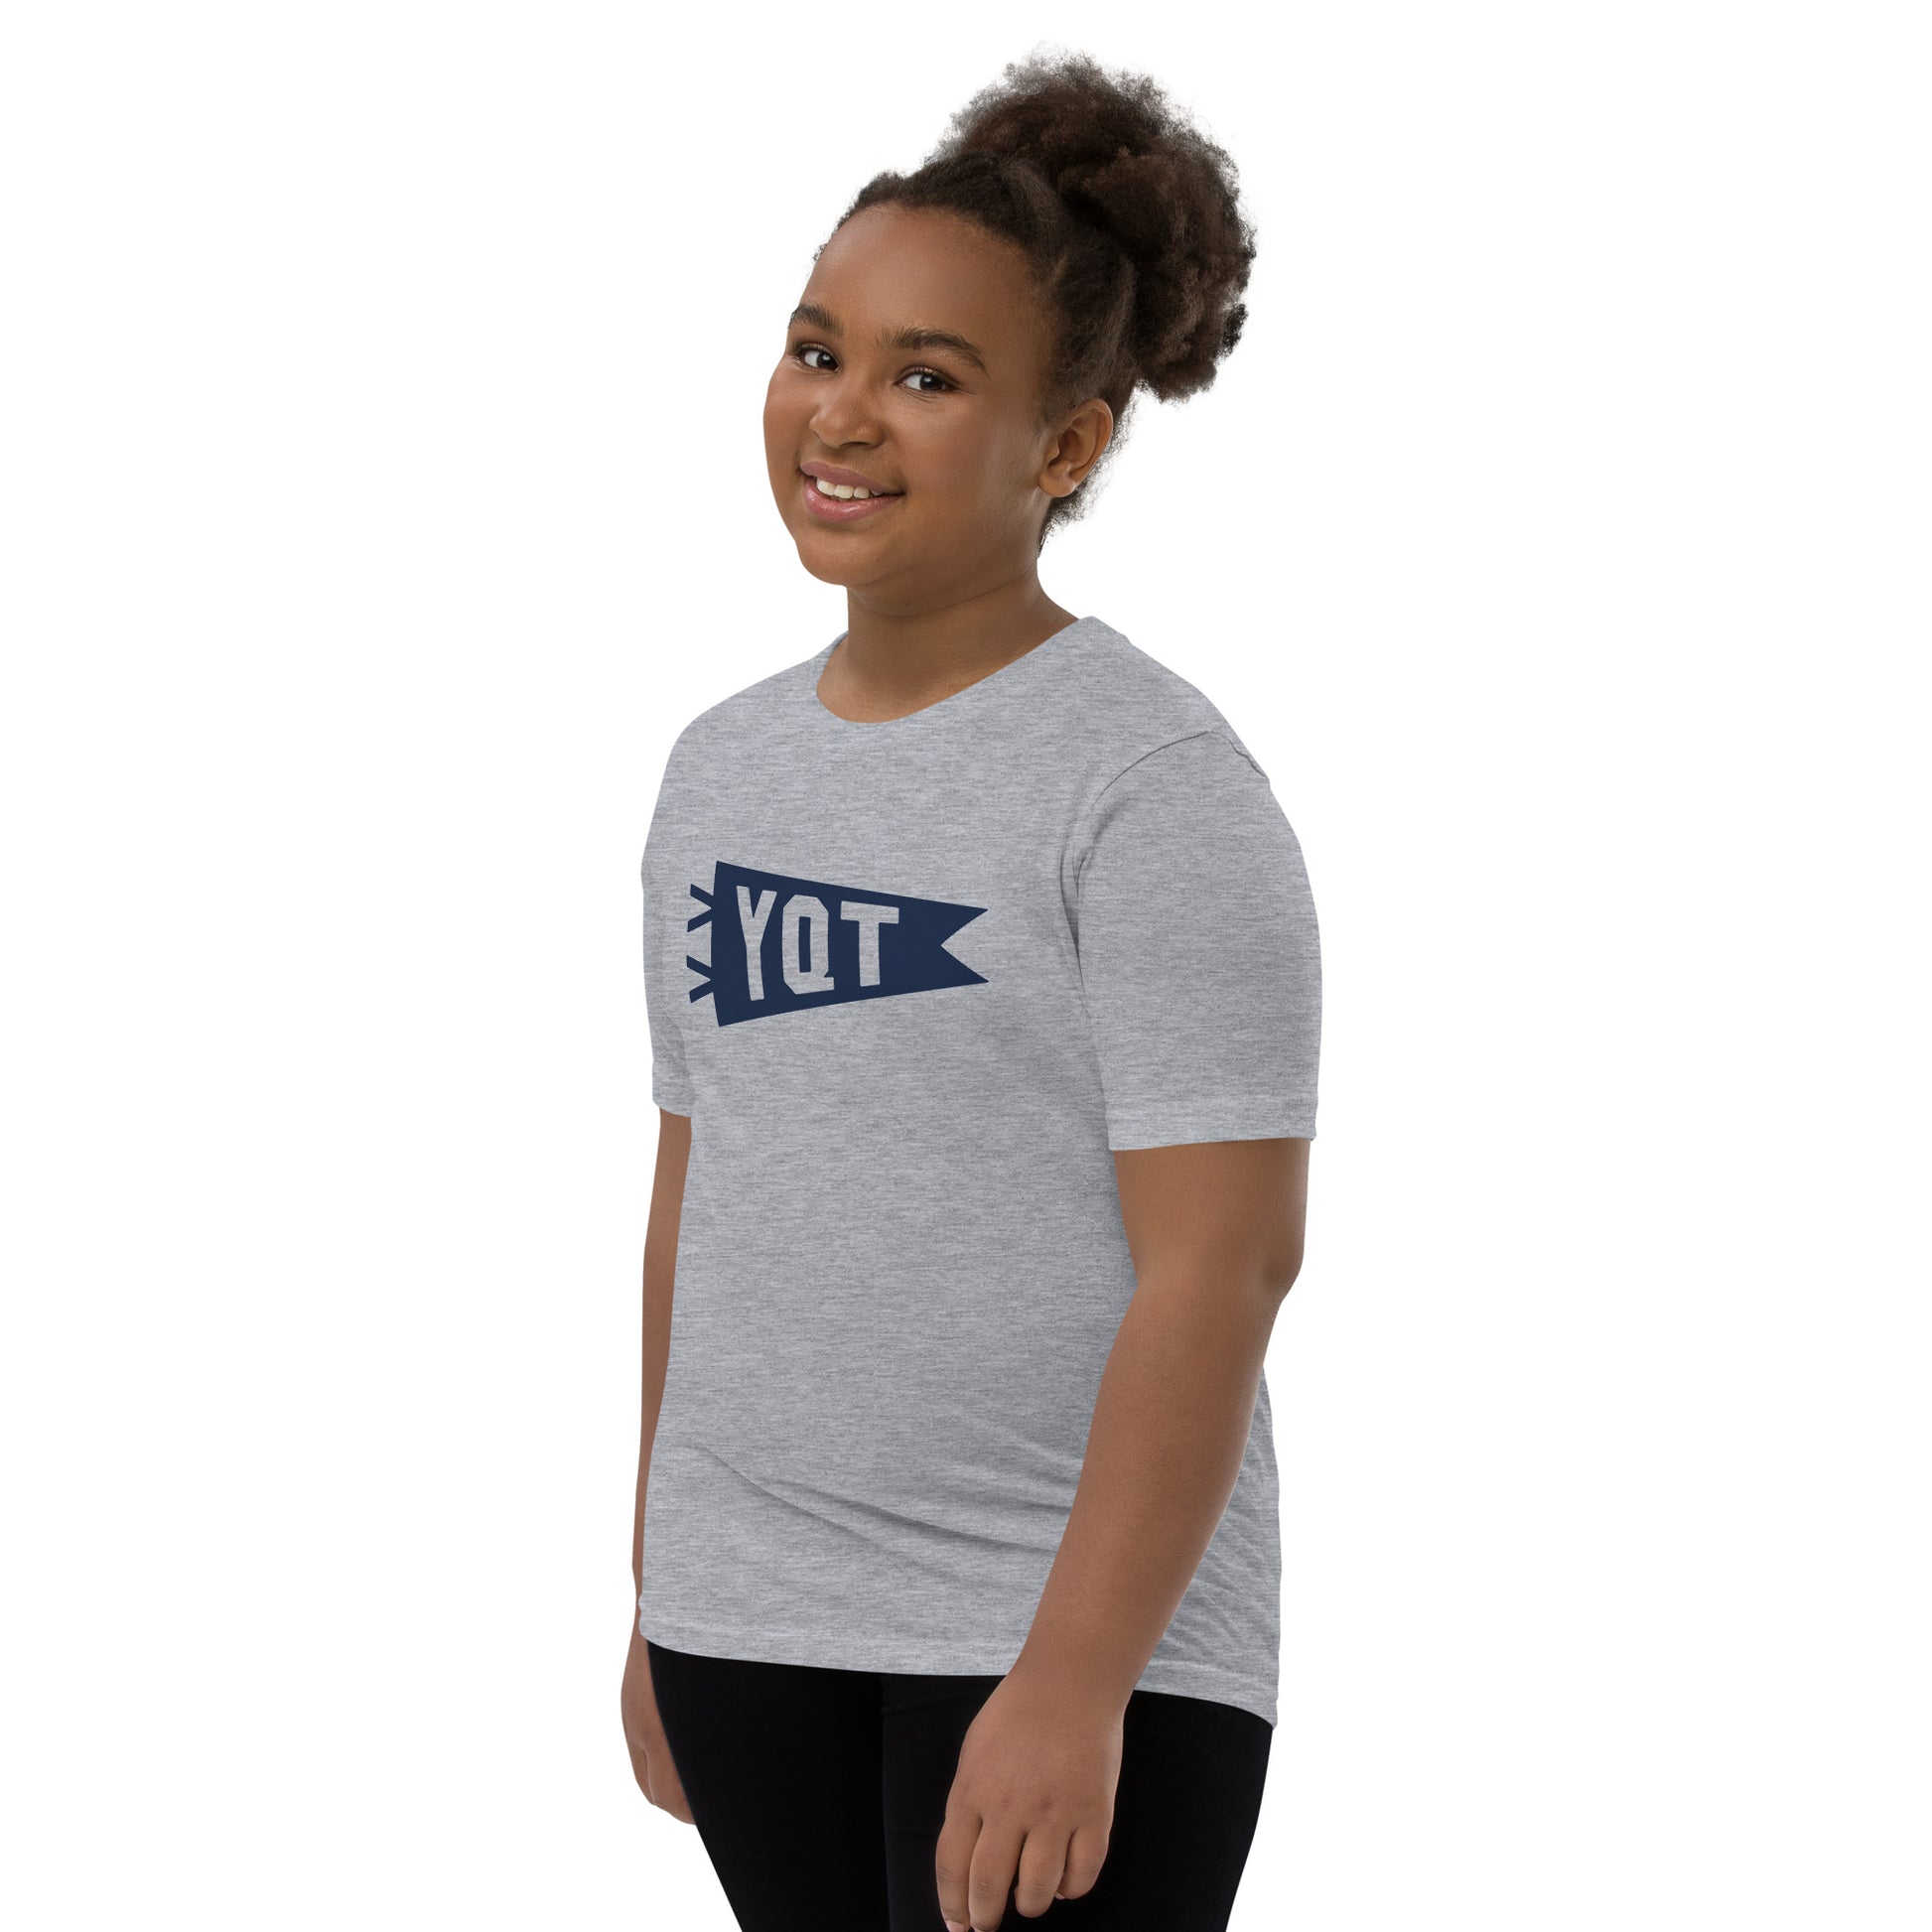 Kid's Airport Code Tee - Navy Blue Graphic • YQT Thunder Bay • YHM Designs - Image 04